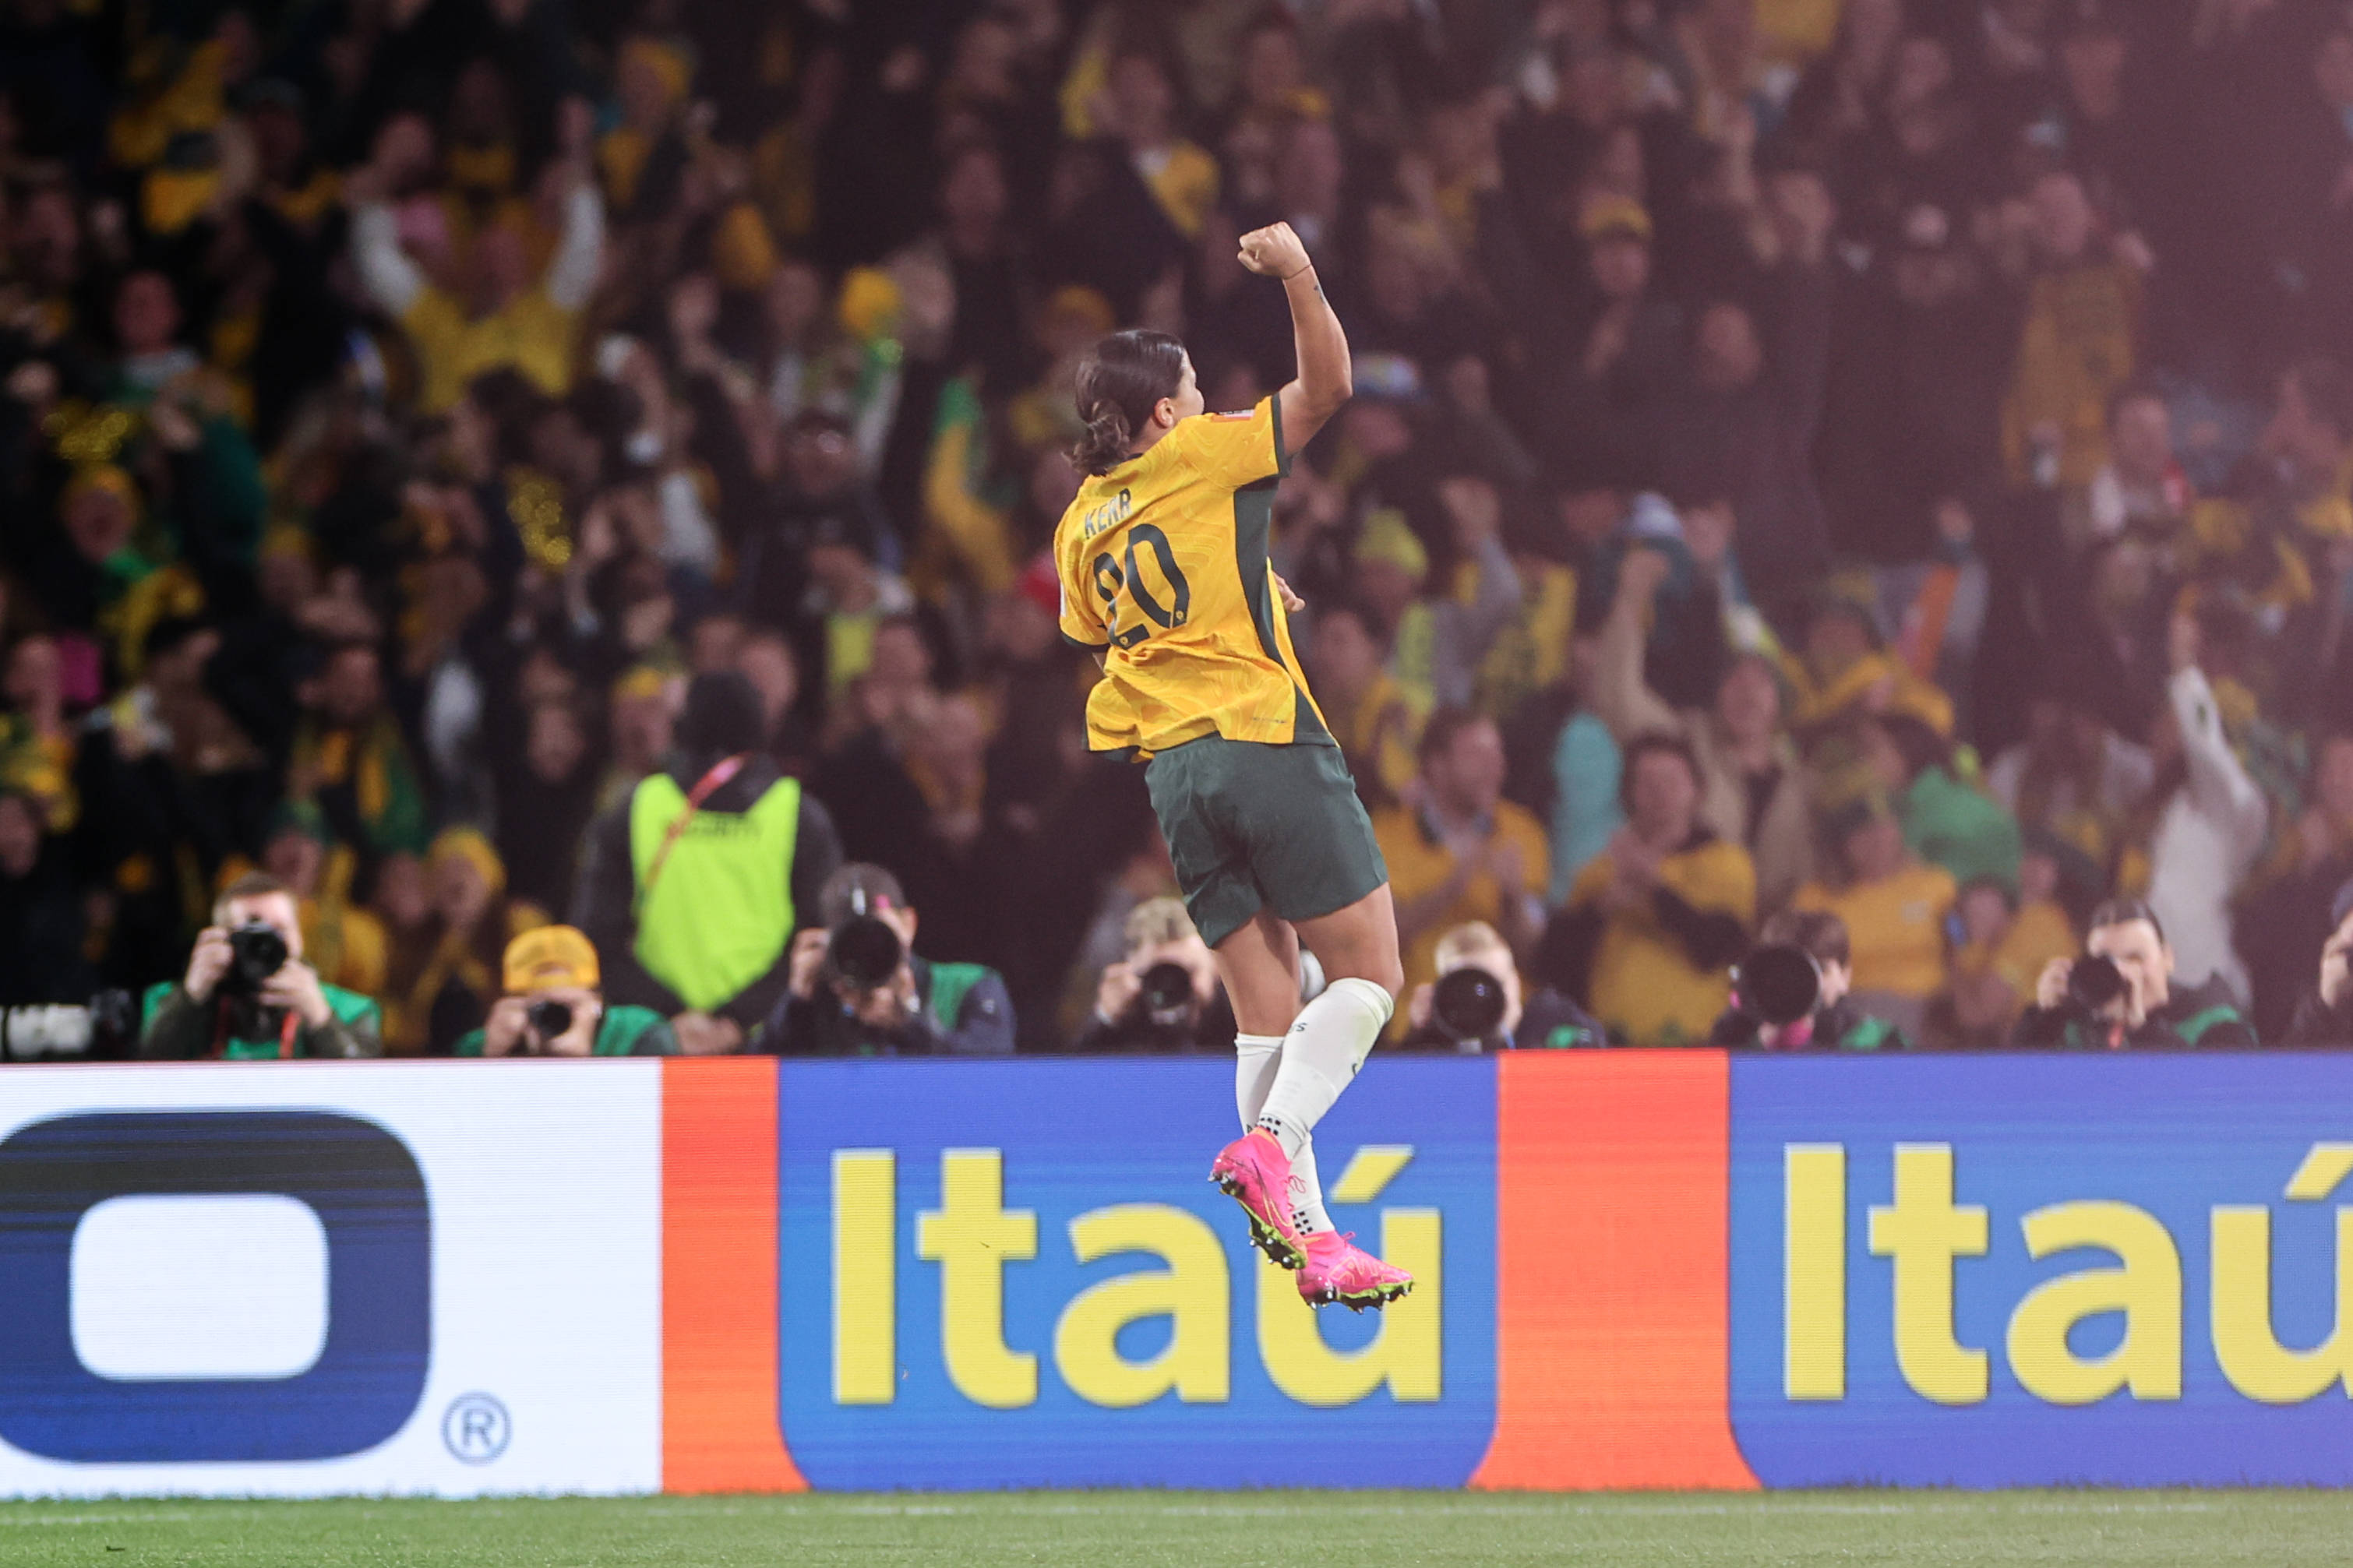 Sam Kerr of Australia celebrates after scoring her team s first goal during the FIFA Women s World Cup Australia & New Zealand 2023 match between Australia and England at Australia Stadium on August 16, 2023 in Sydney, Australia.